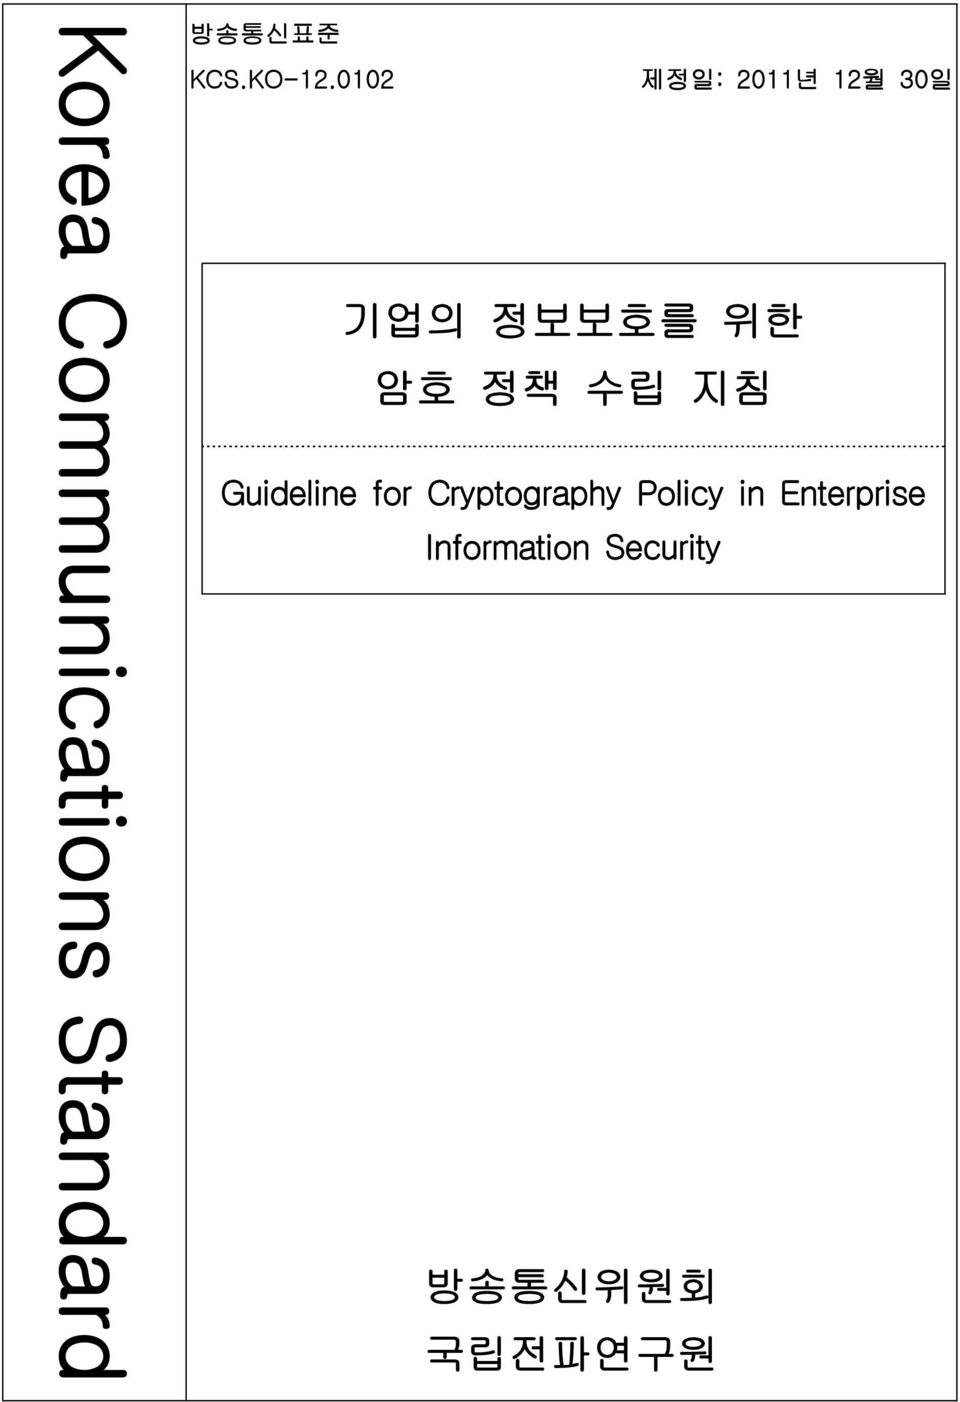 Guideline for Cryptography Policy in